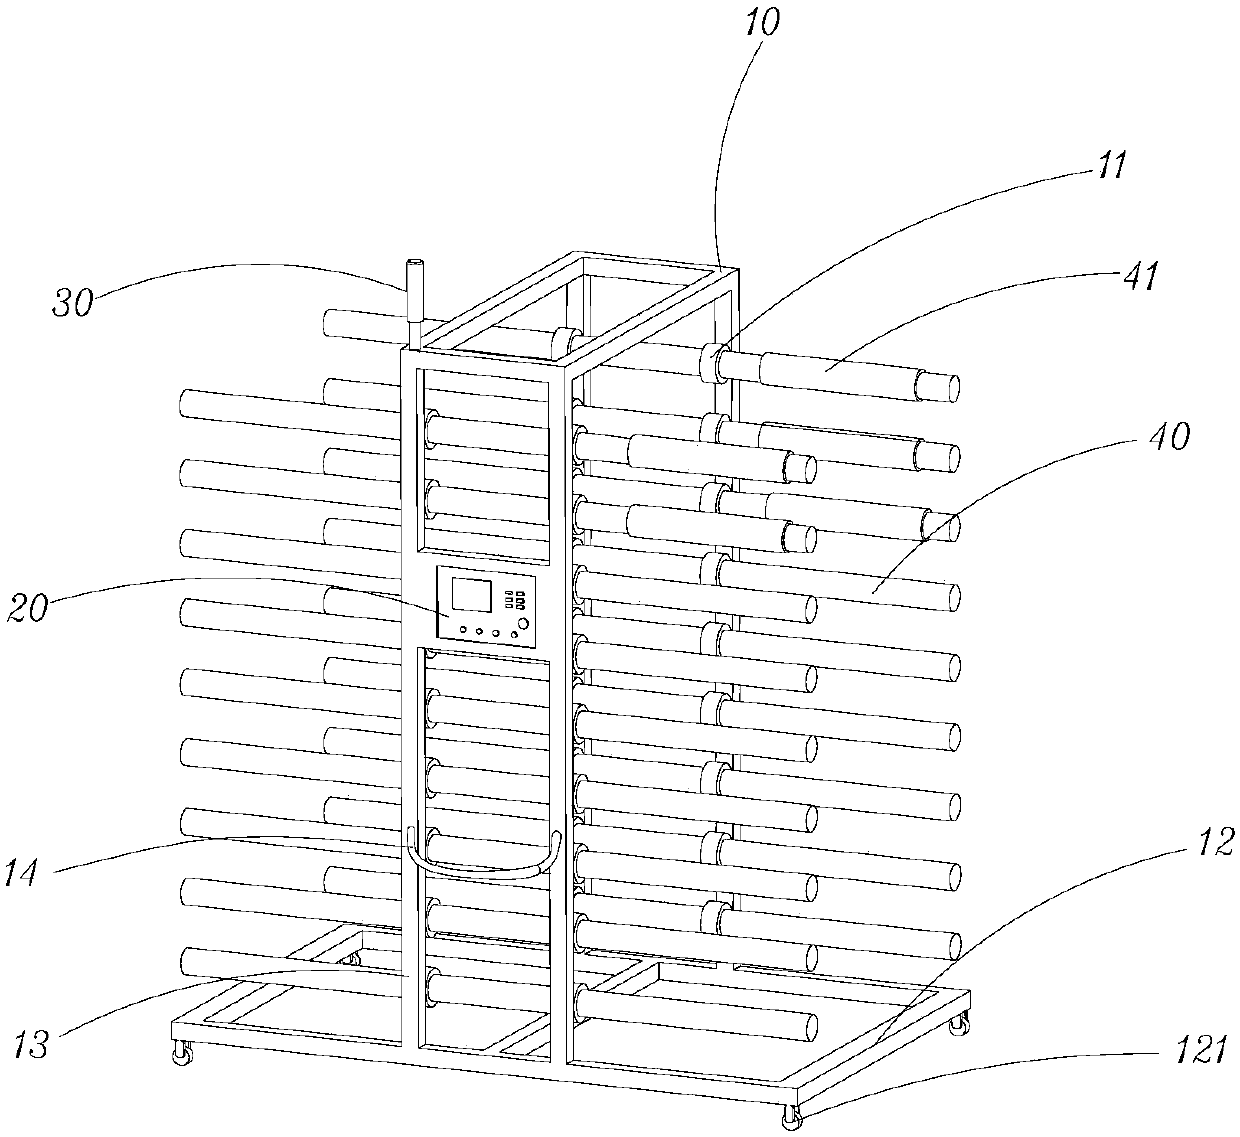 Bath mirror airing placing device with timing function